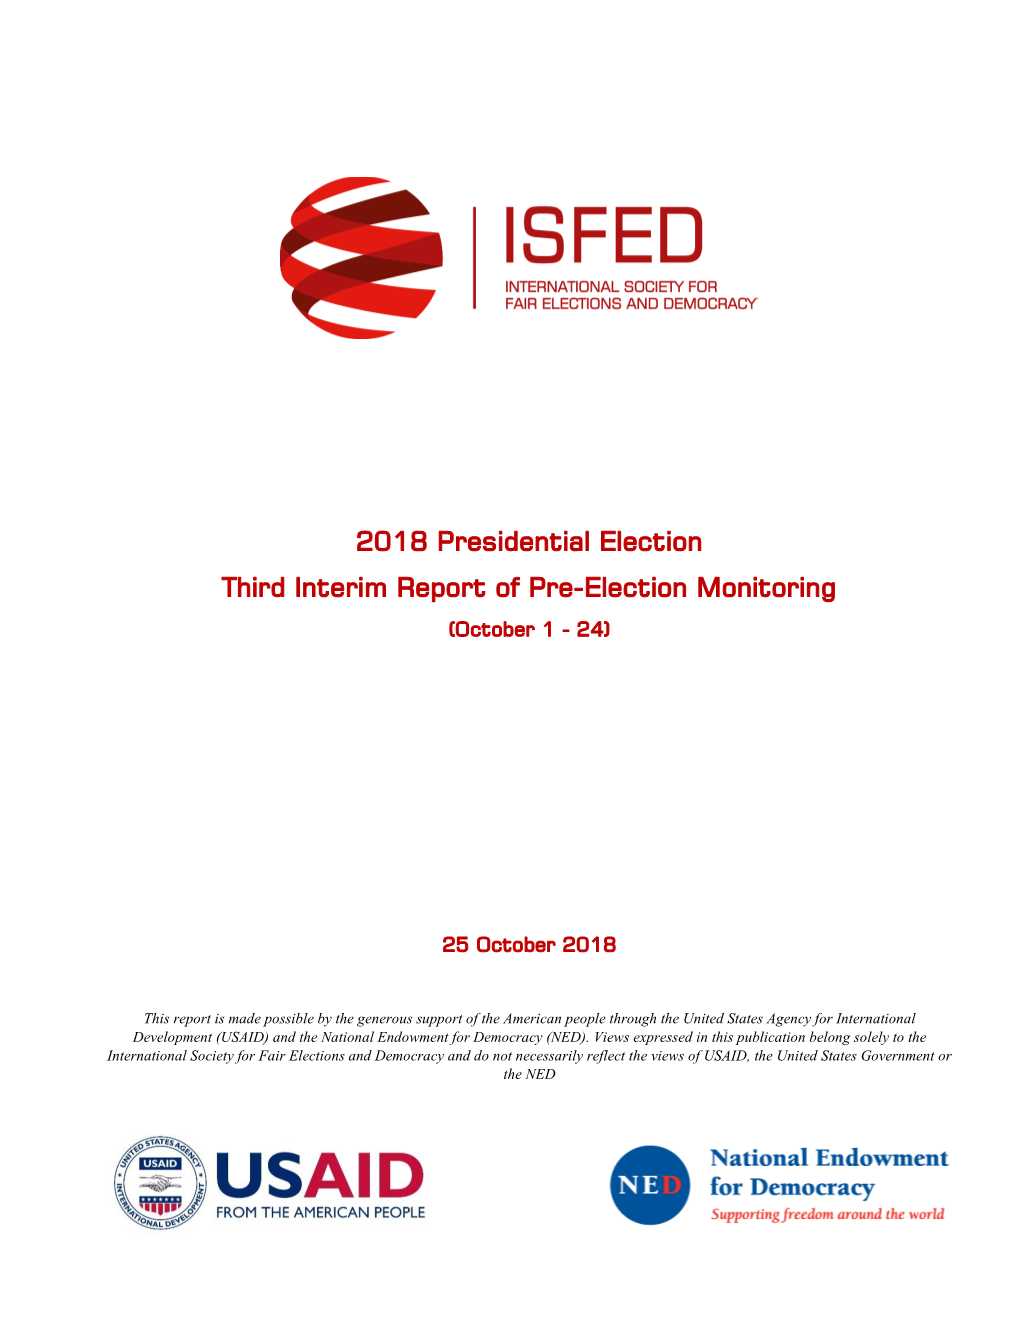 2018 Presidential Election Third Interim Report of Pre-Election Monitoring (October 1 - 24)